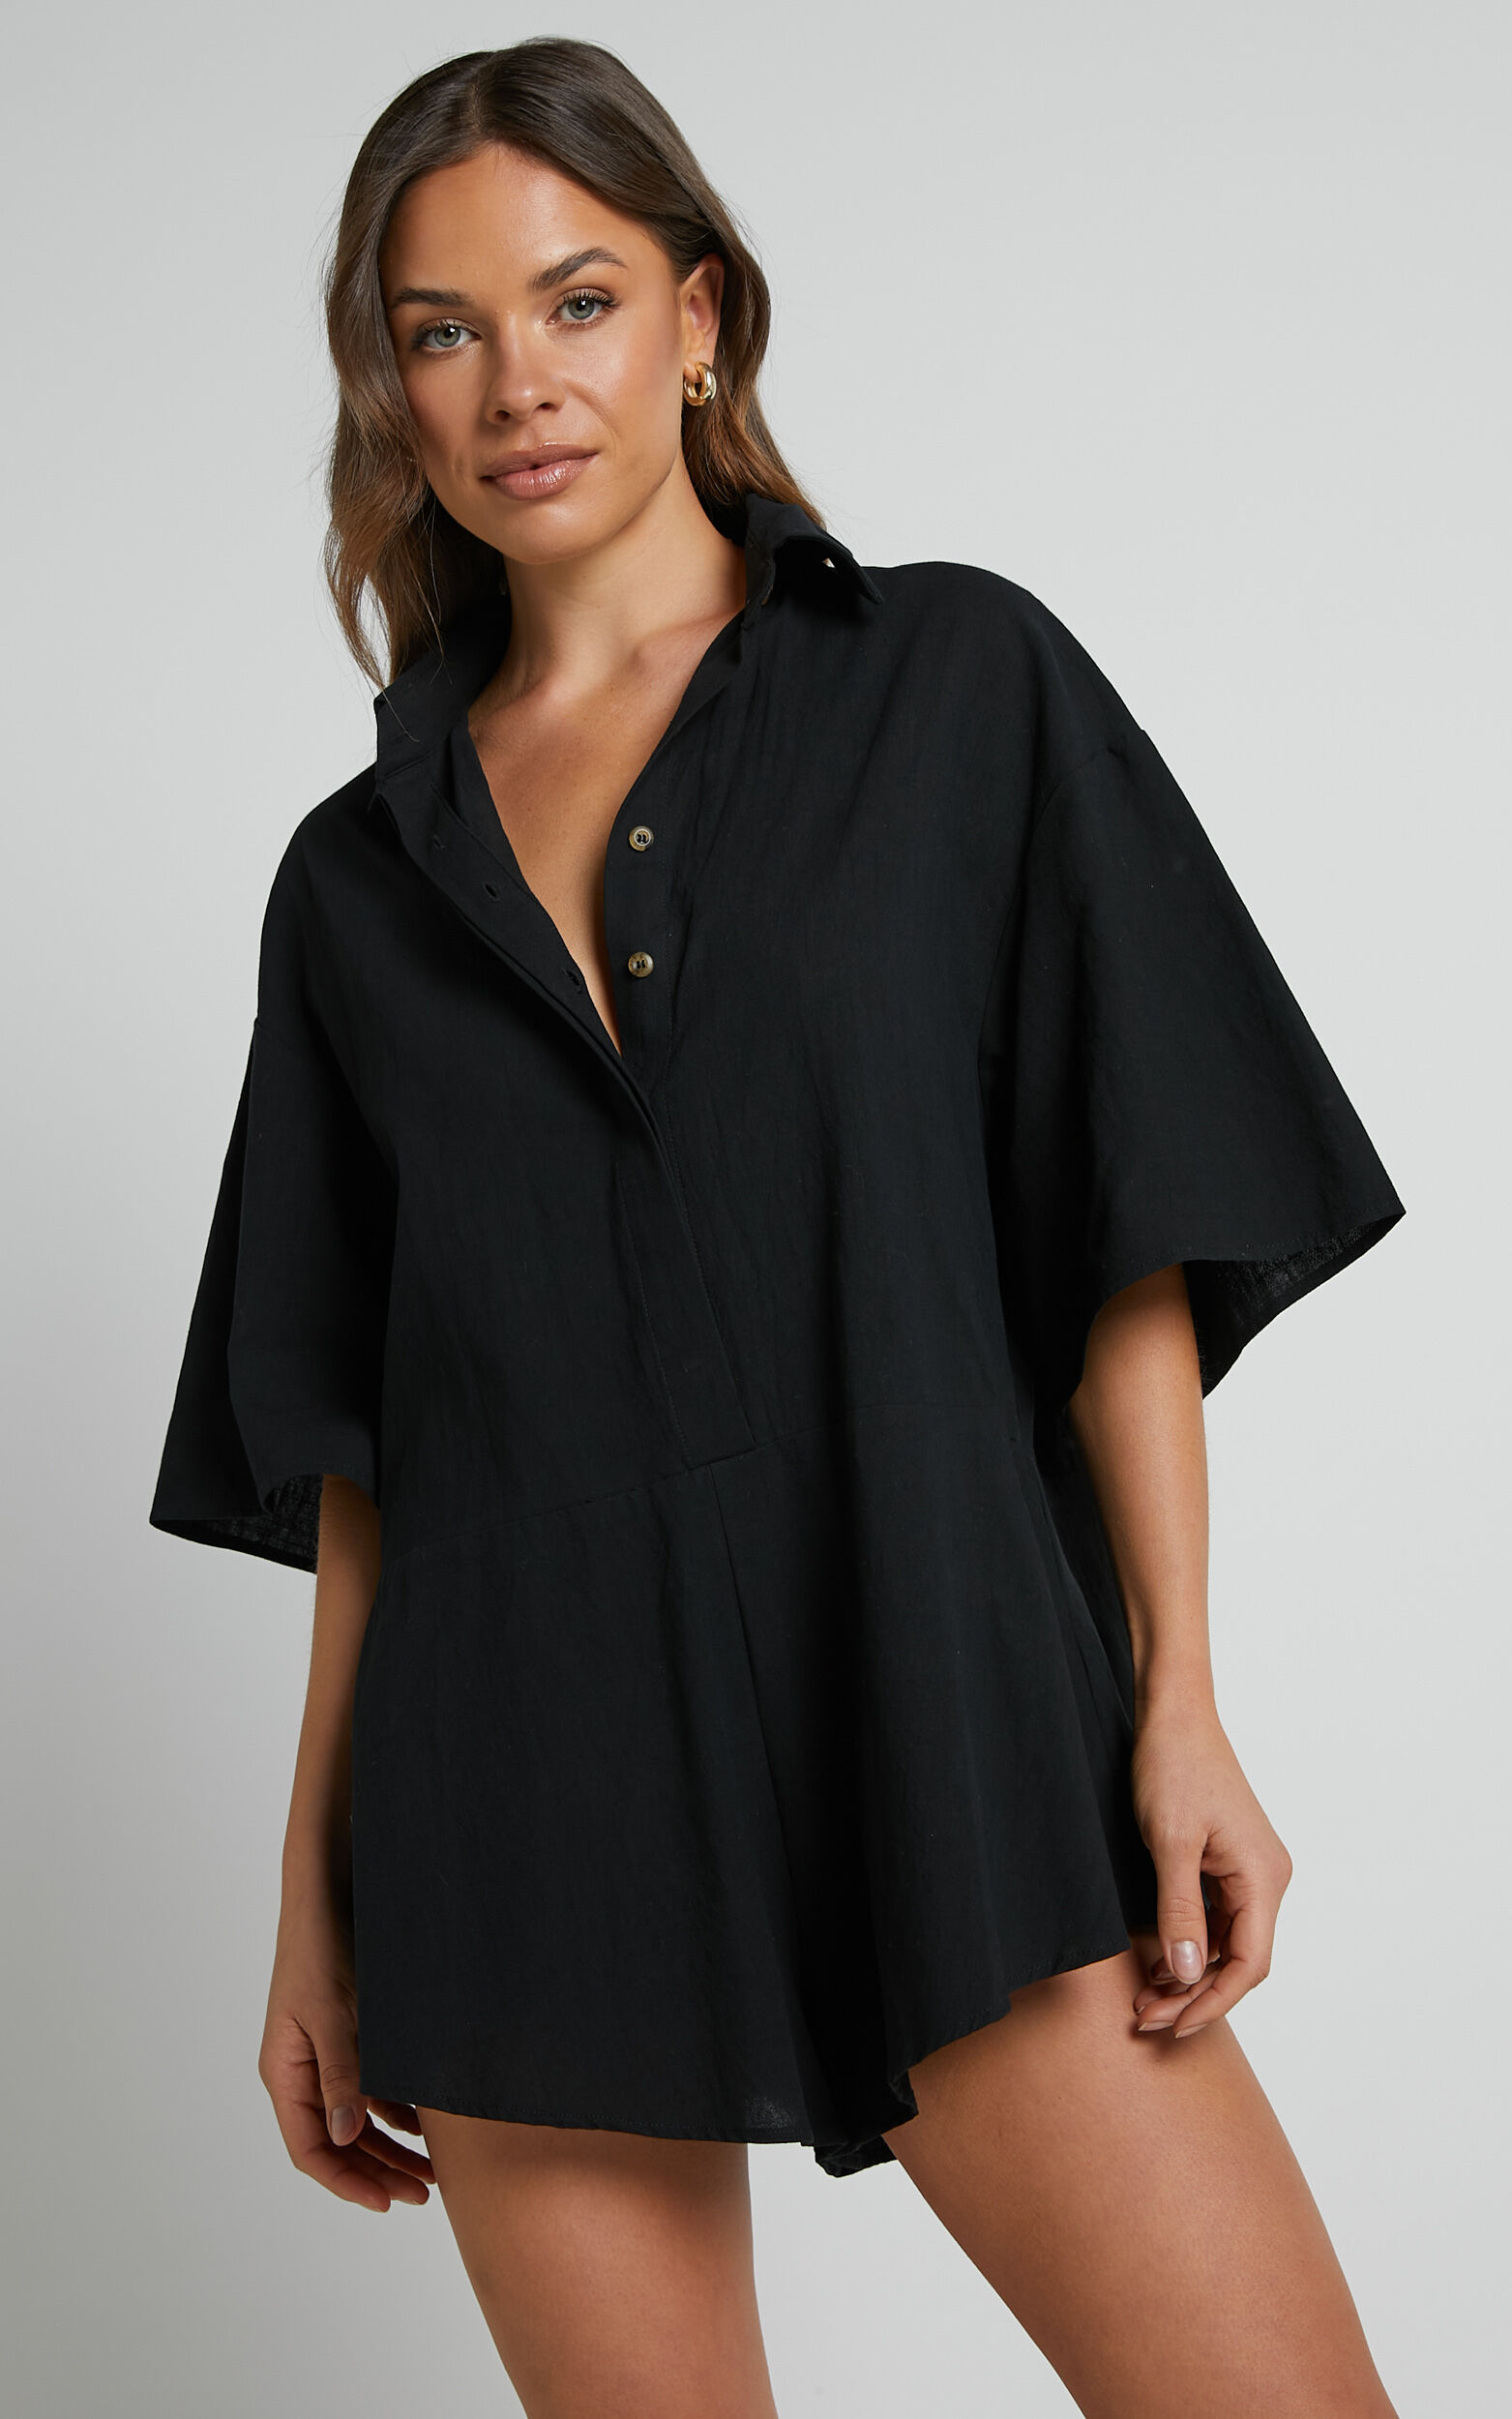 Ankana Playsuit - Short Sleeve Relaxed Button Front Playsuit in Black - 06, BLK1